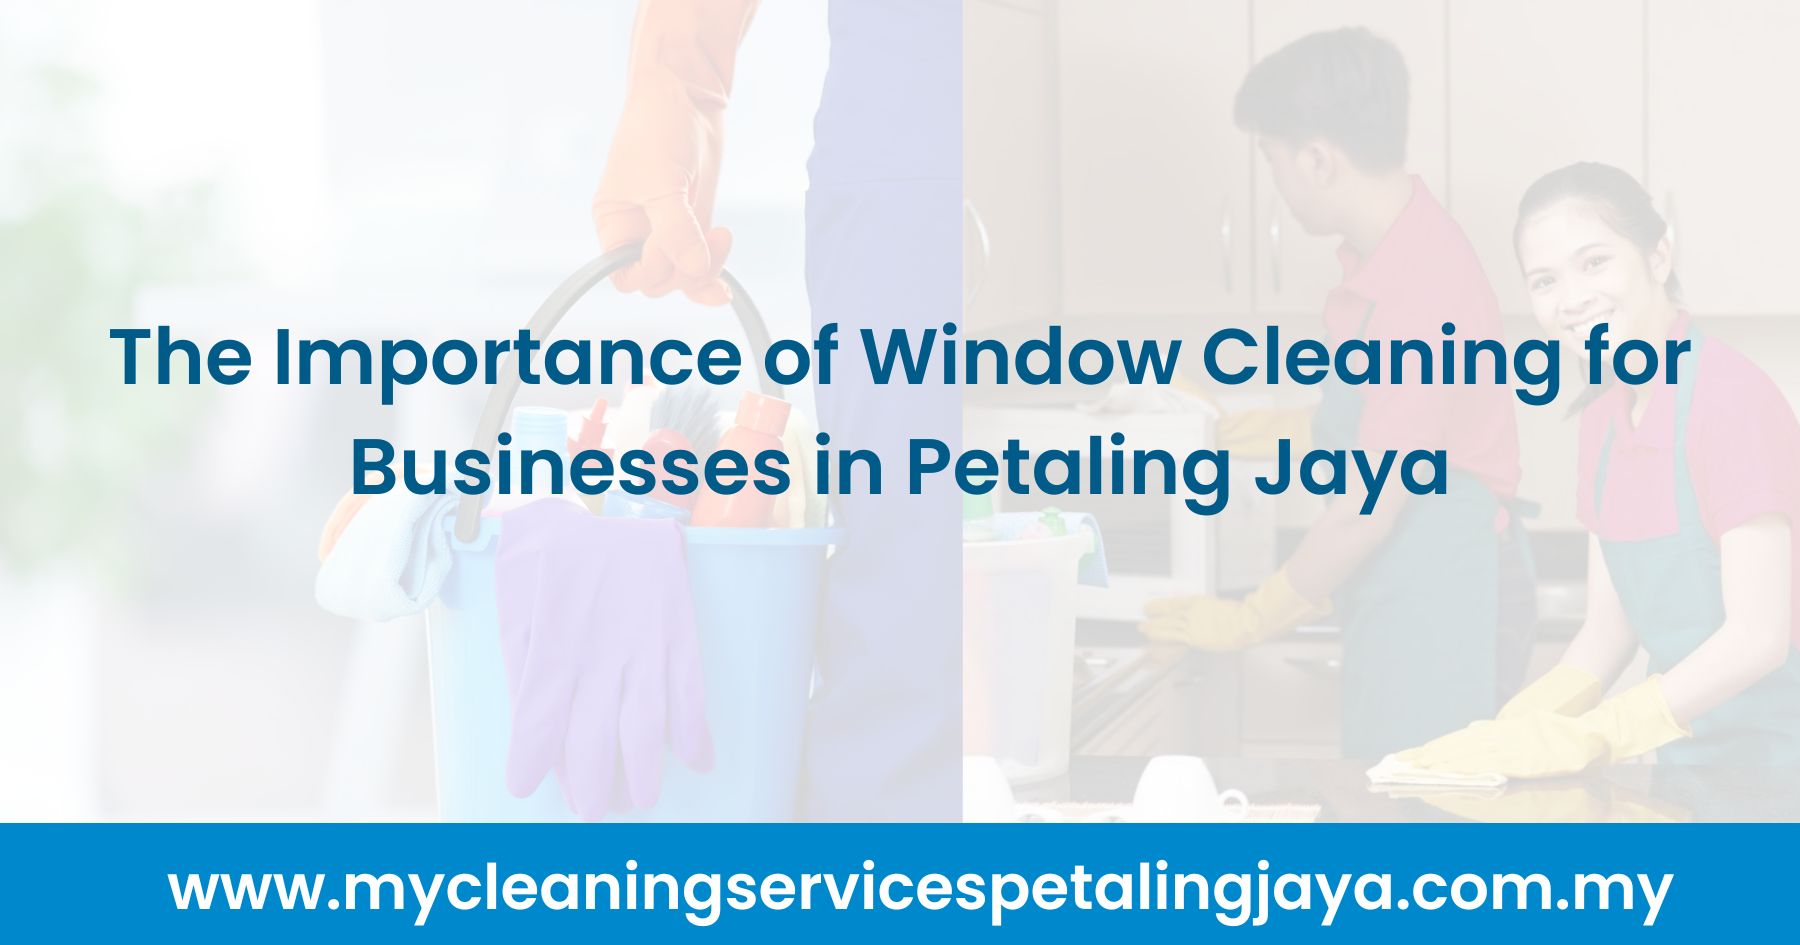 The Importance of Window Cleaning for Businesses in Petaling Jaya